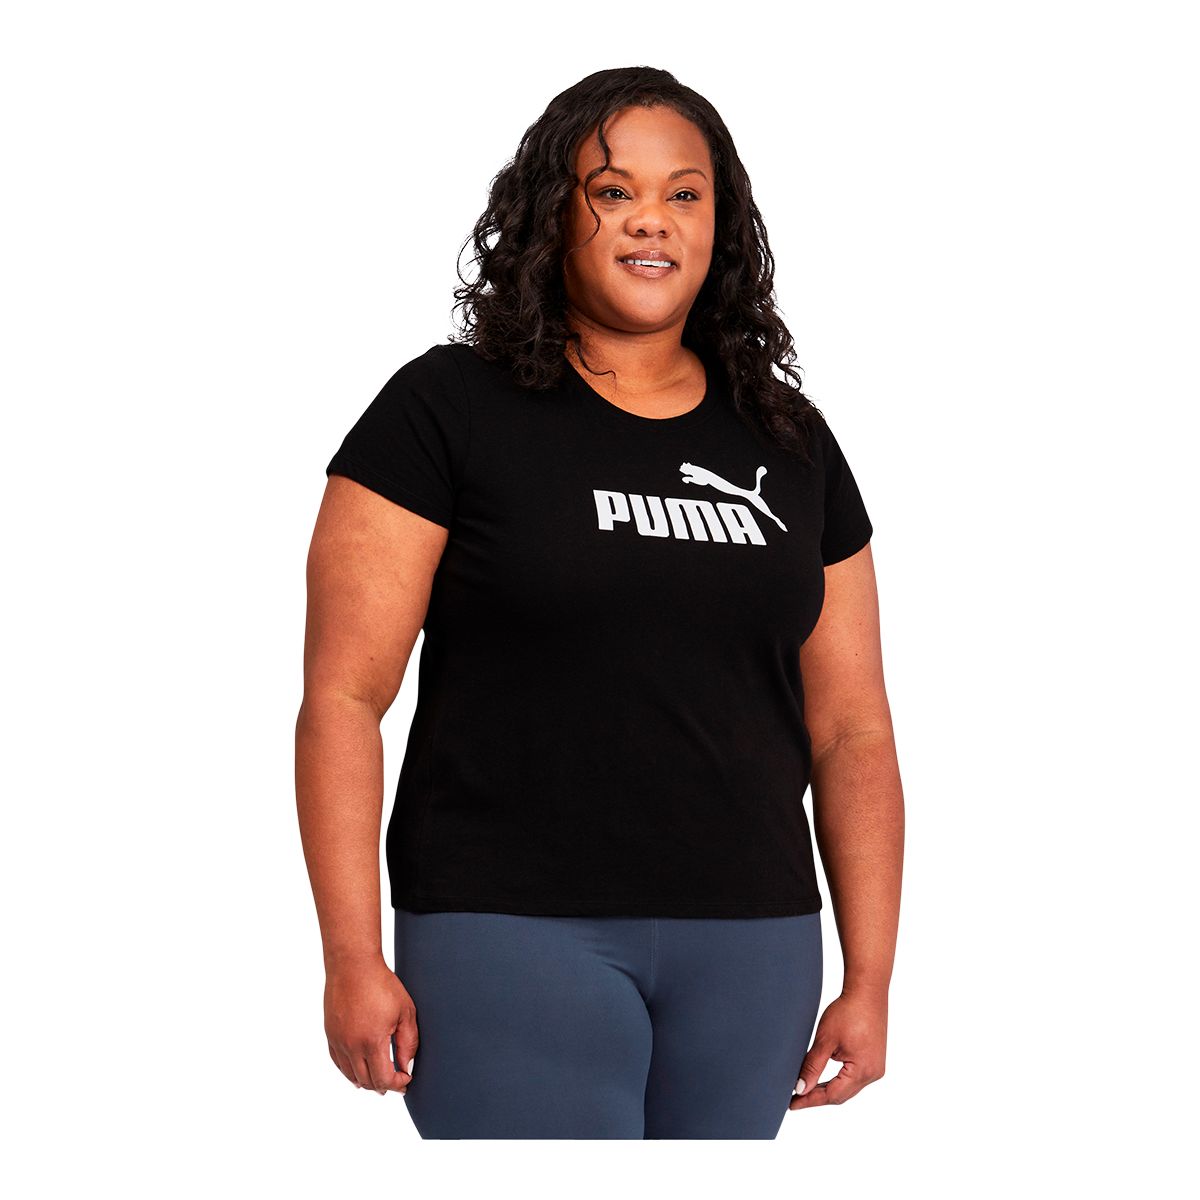 https://media-www.atmosphere.ca/product/div-03-softgoods/dpt-70-athletic-clothing/sdpt-02-womens/333486333/puma-w-ess-plus-tee-q321-bl-cotton-black-2x--6820ed67-33d3-44c8-85c2-e98fee8581cb-jpgrendition.jpg